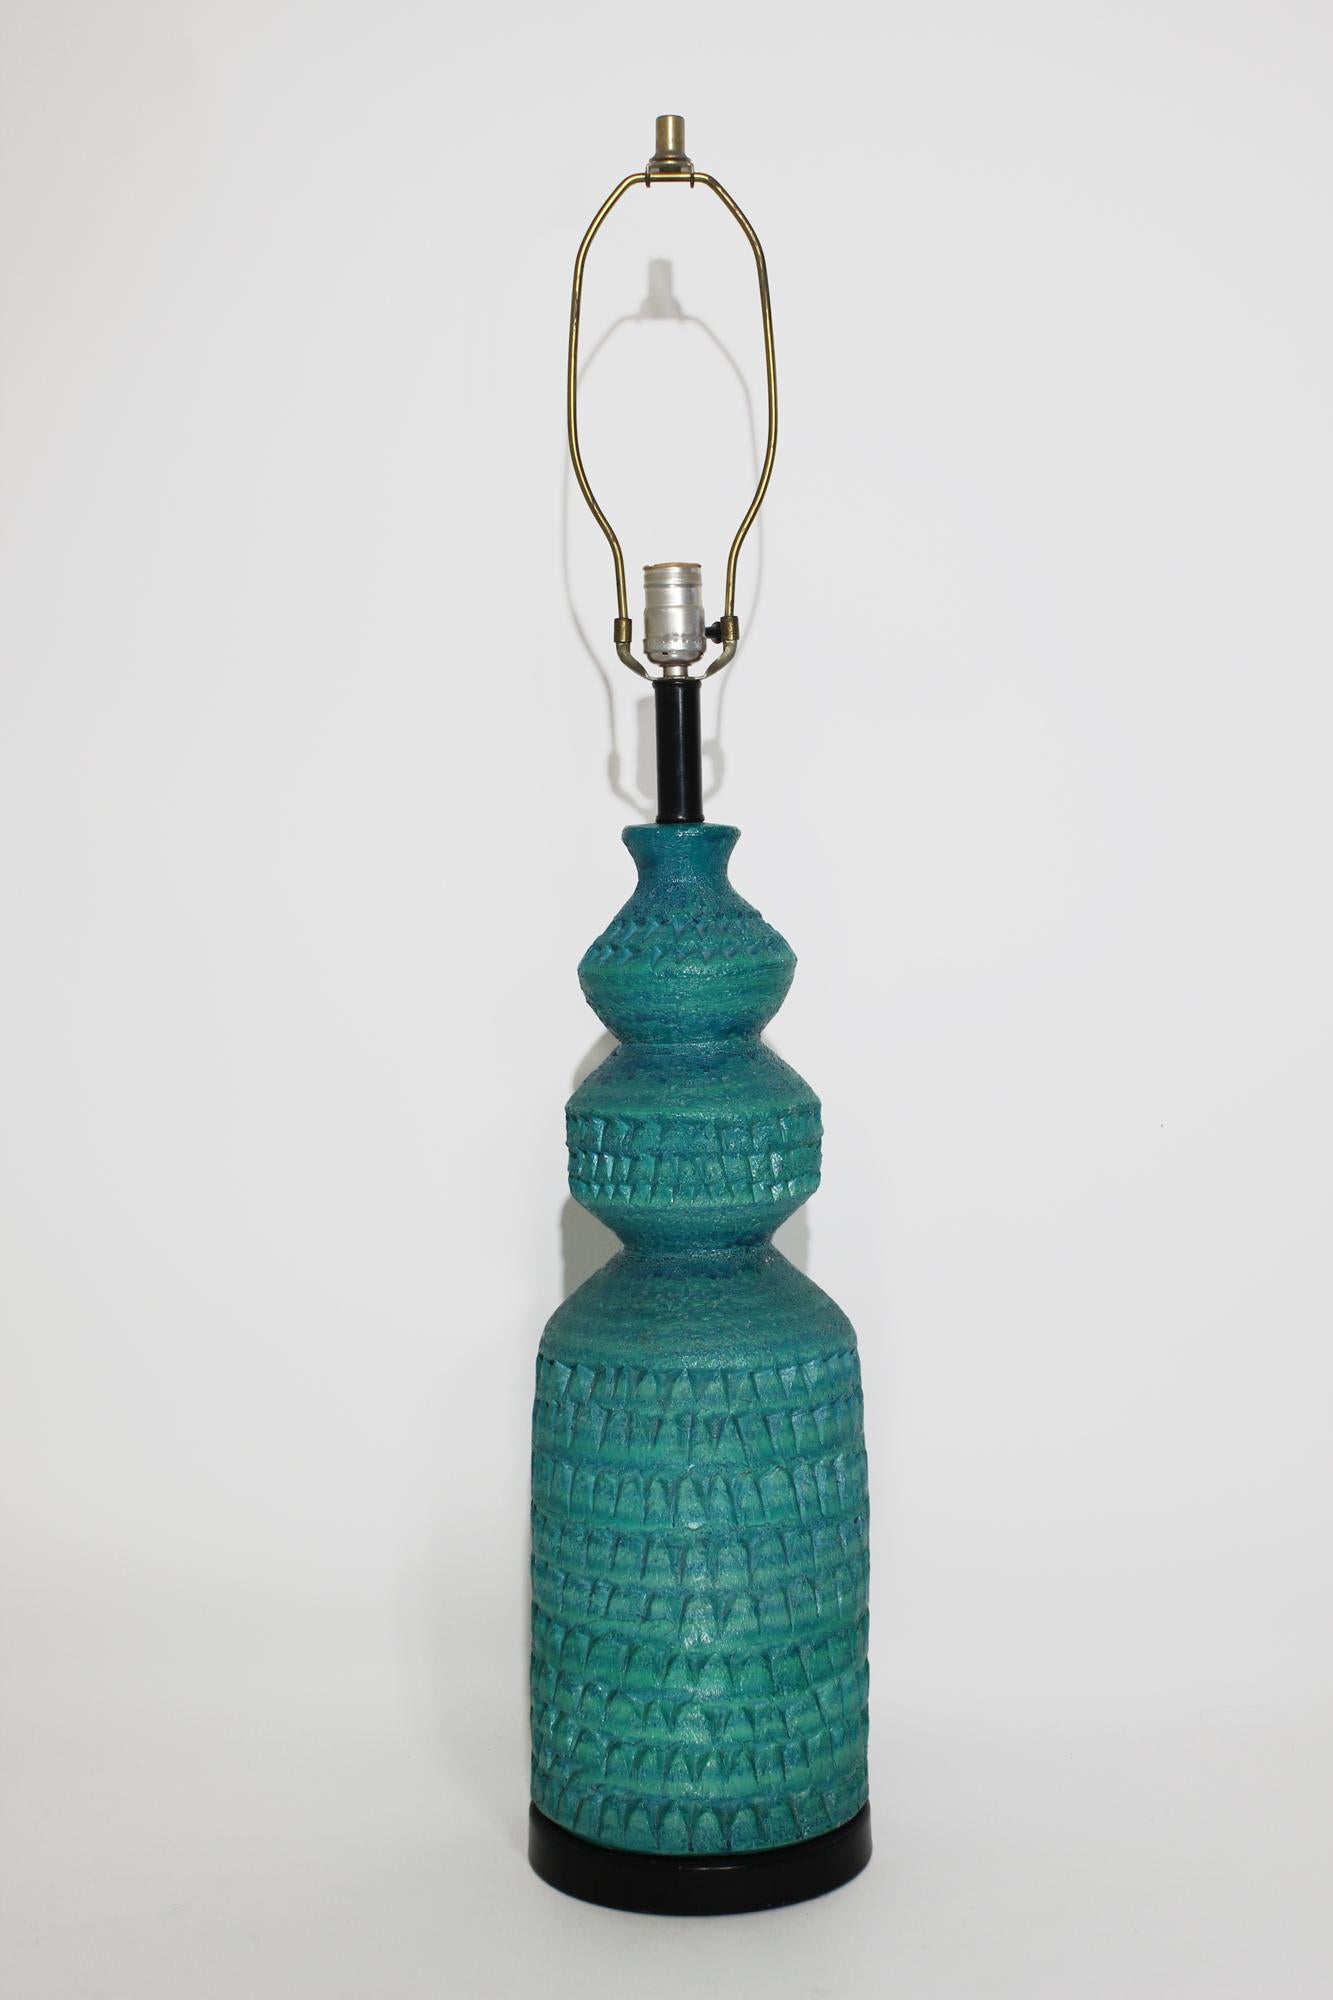 1960s vintage Italian lamp, attributed to Alvino Bagni, multiformed with three distinct pottery shapes incised with a small triangular pattern. Turquoise glaze has subtle tones of green and blue mixed in. Heavily textured with a moderate luster.